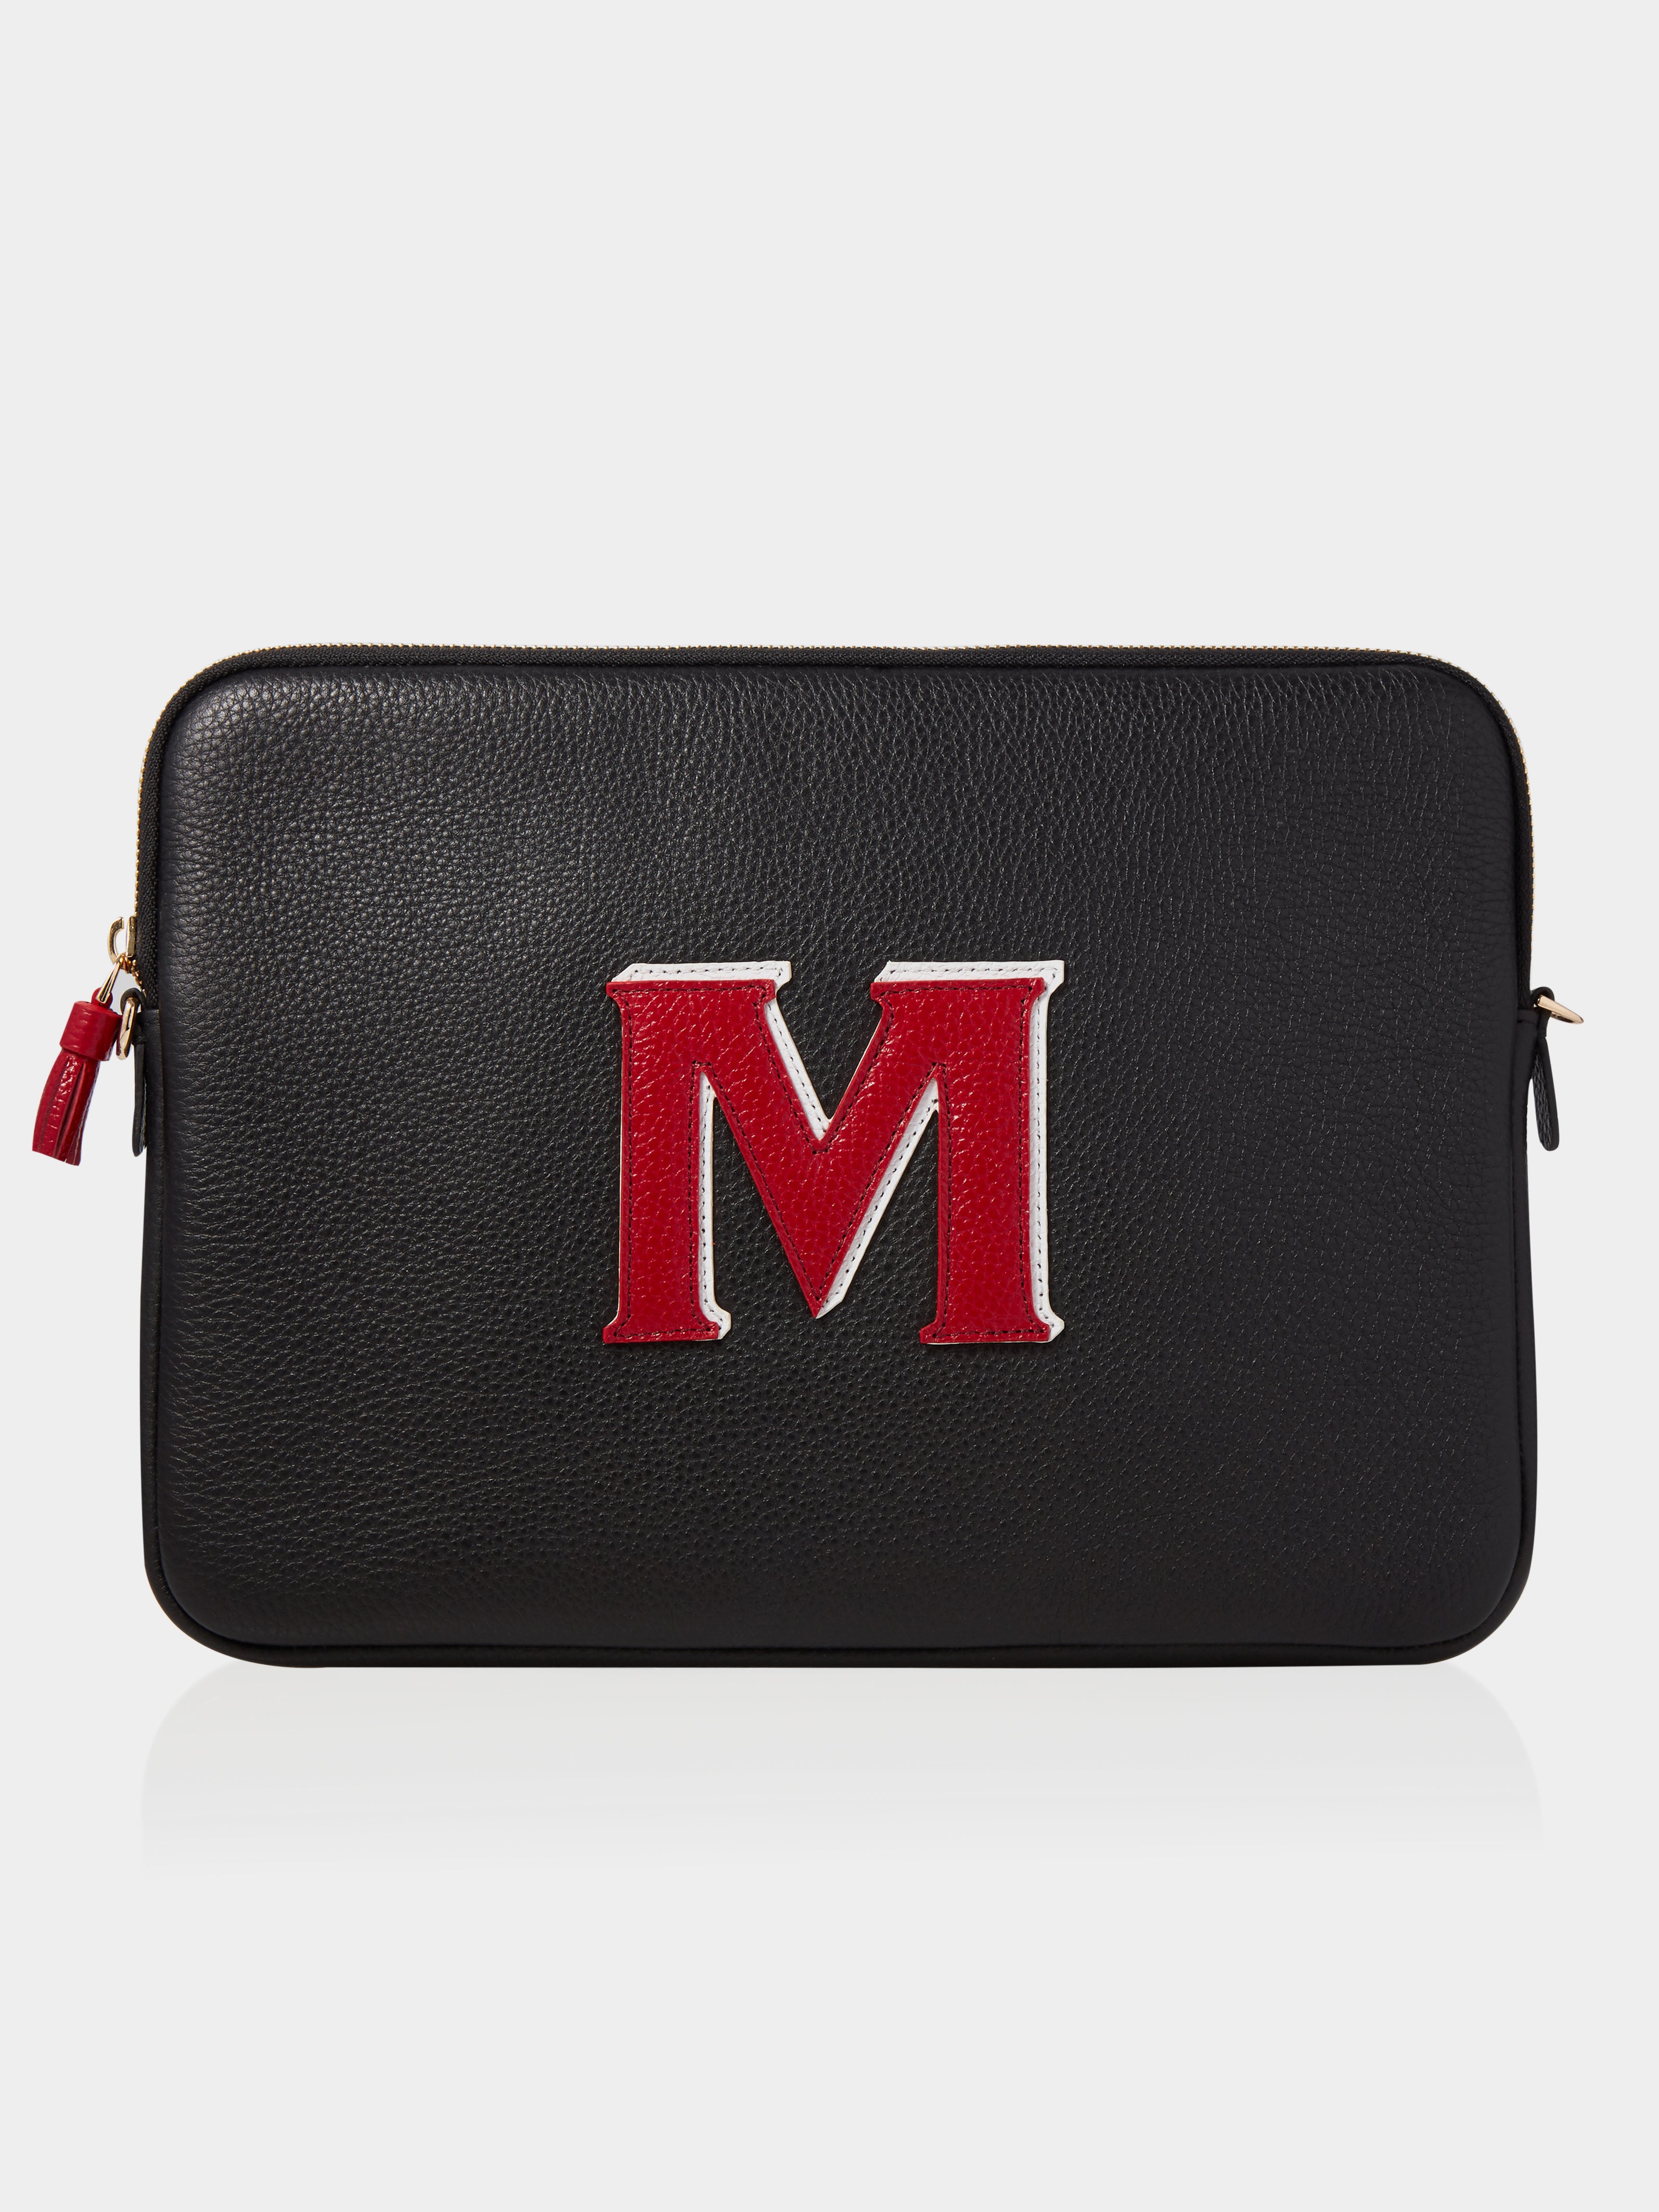 The Laptop Case, Black & Red